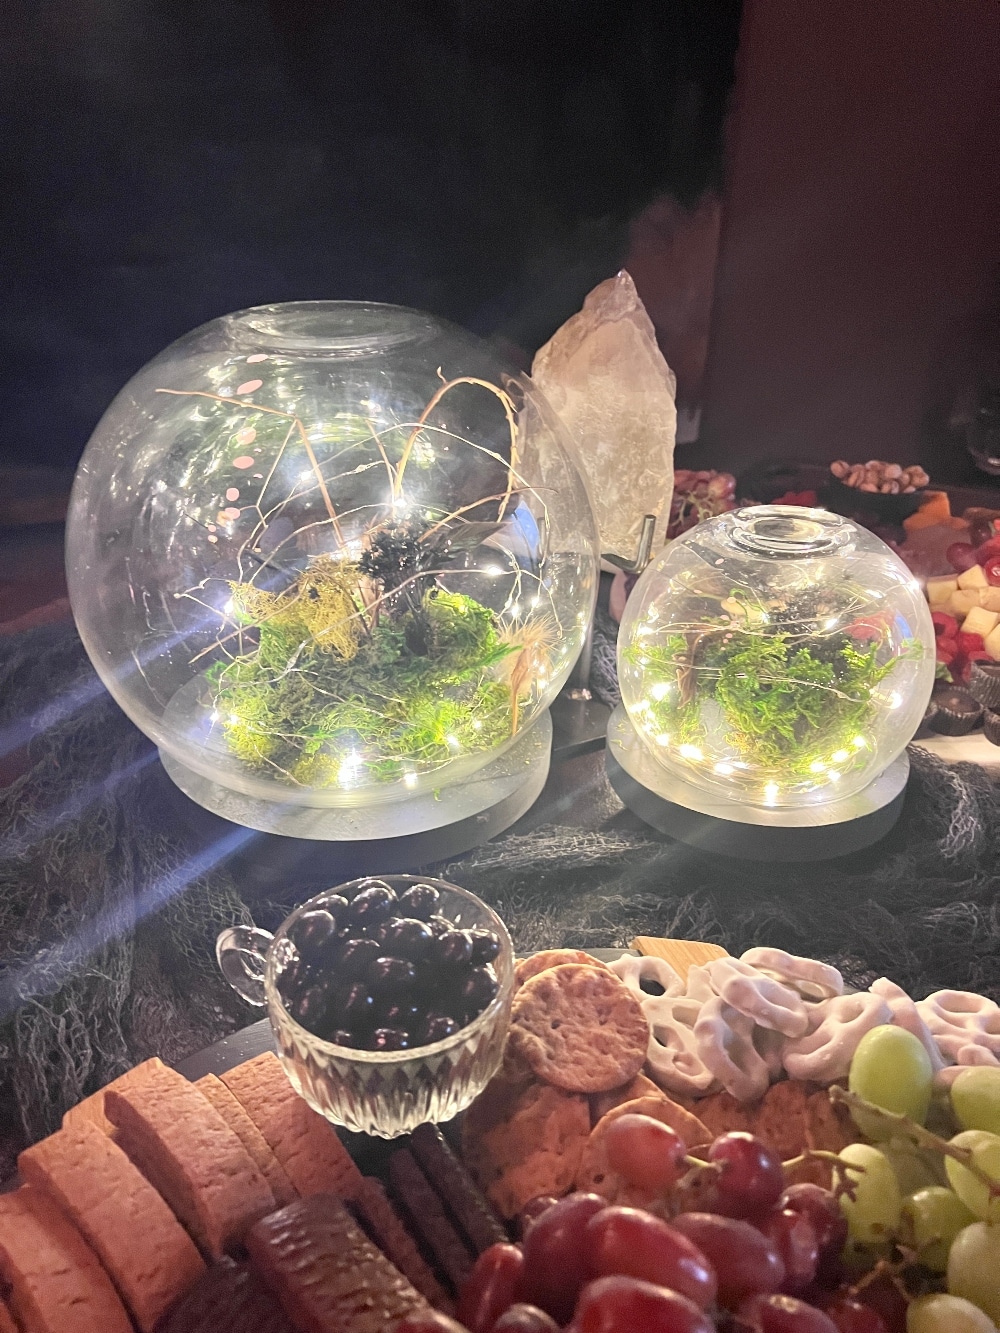 DIY Spooky Upscale Cloche Centerpiece: A Terrifyingly Elegant Halloween Project. Create an enchanting DIY centerpiece into a hauntingly elegant cloche for your Halloween celebrations.